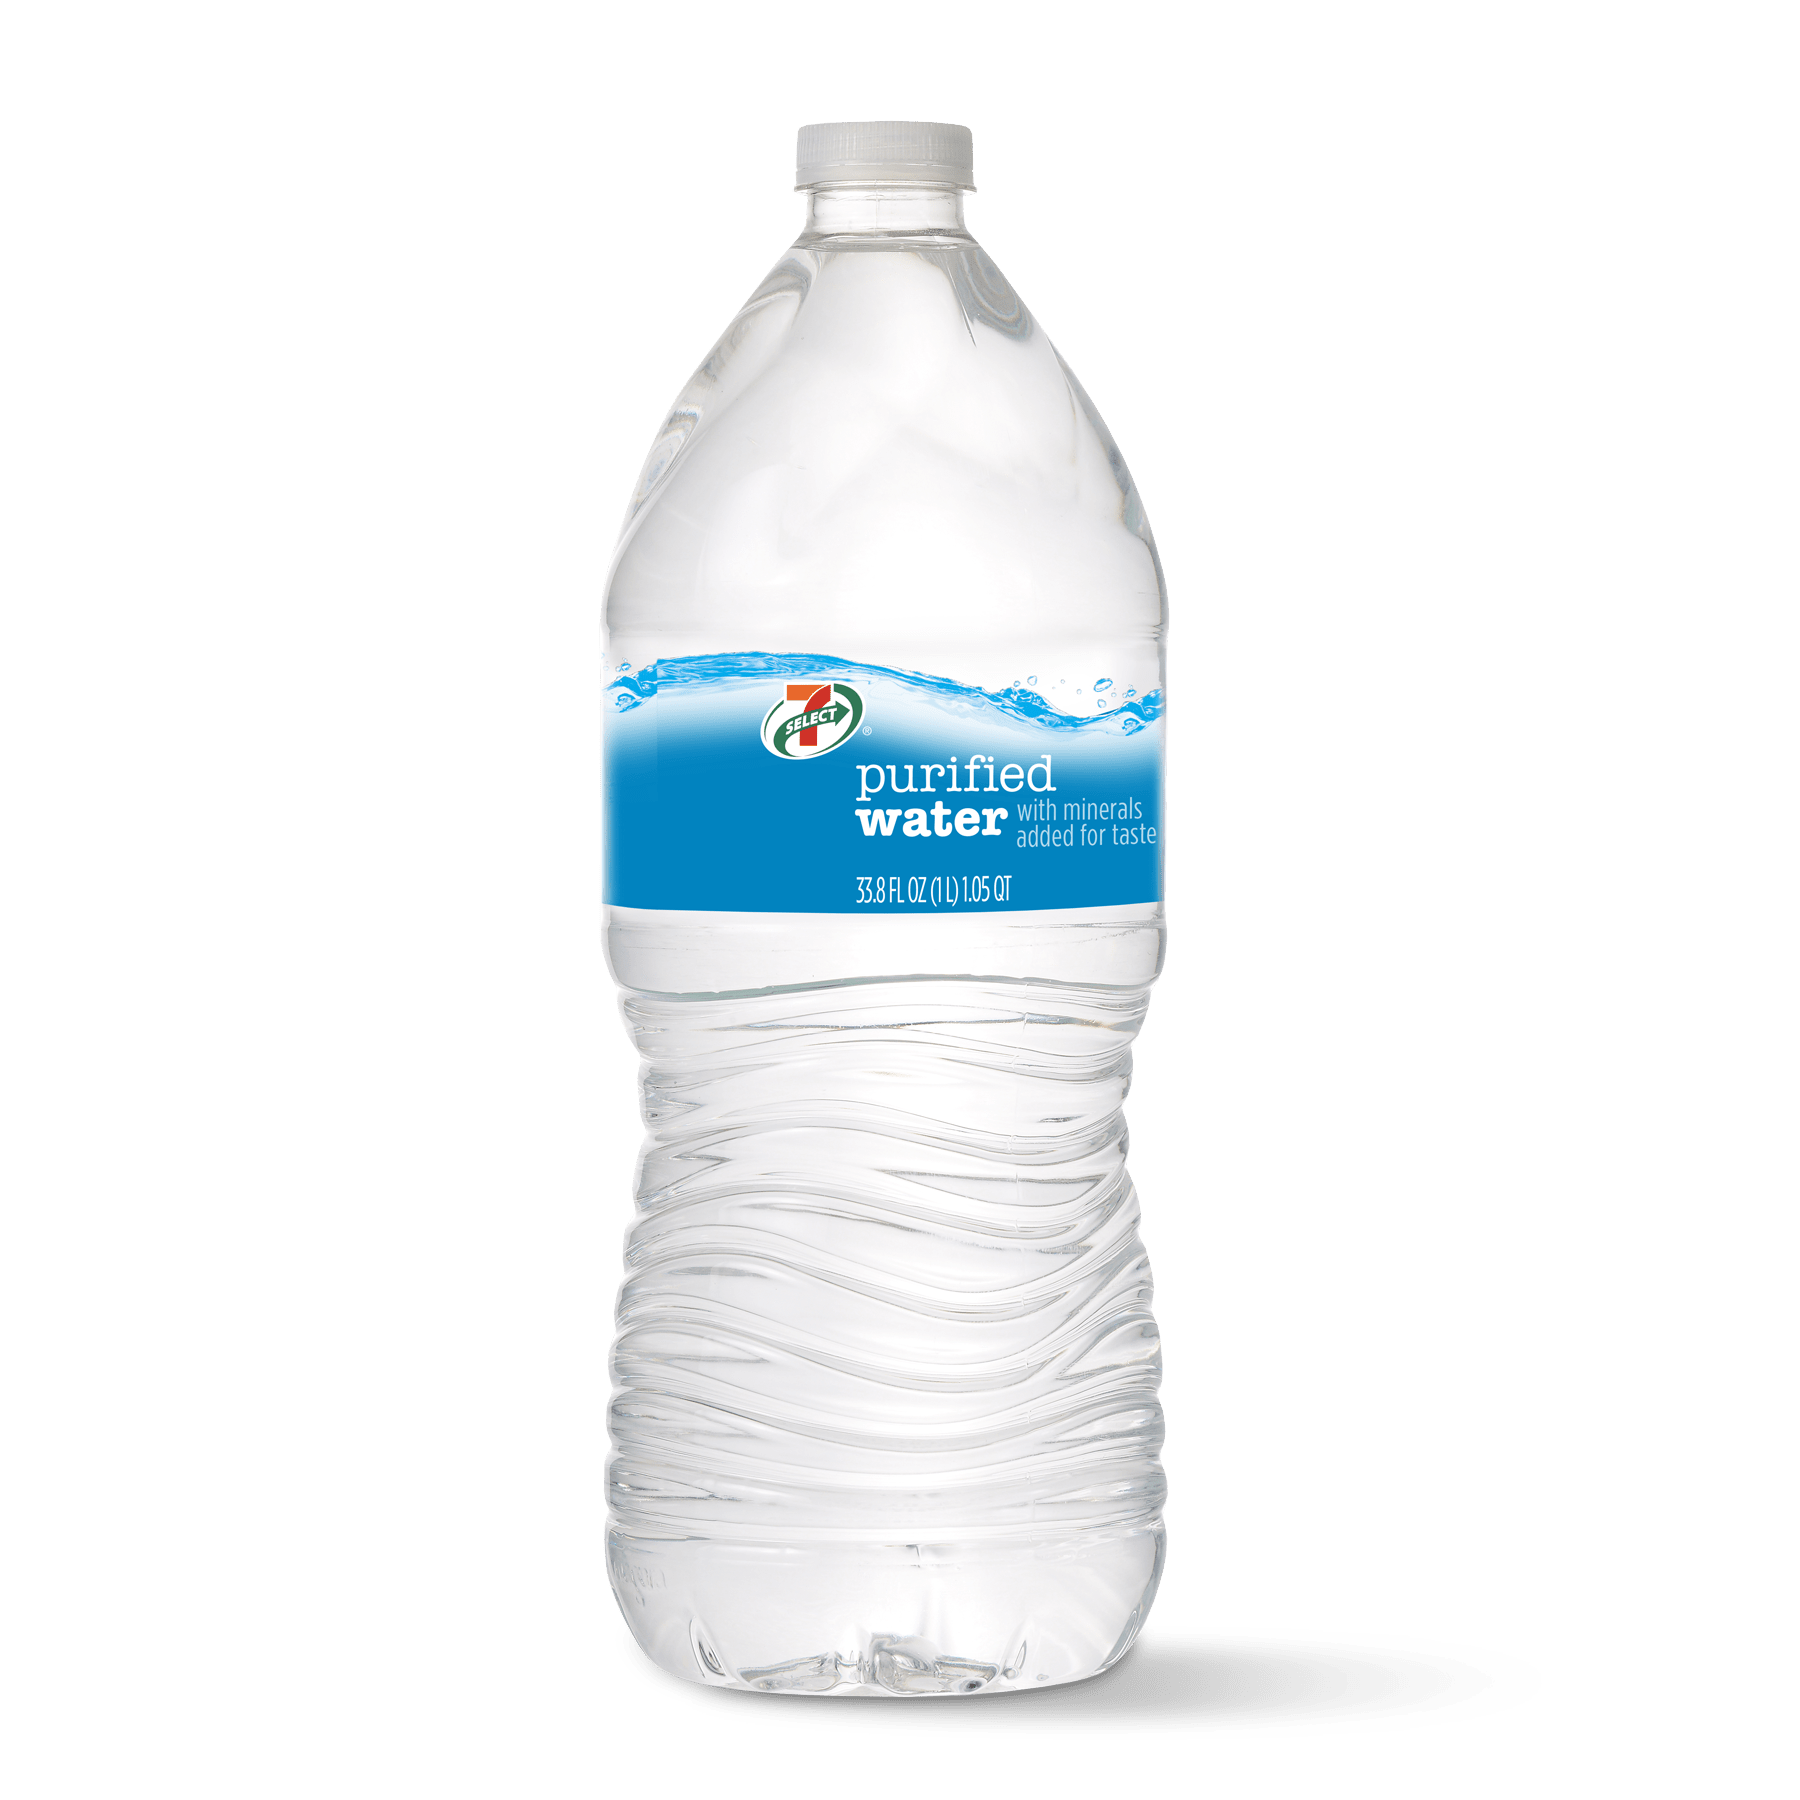 Distilled Water 4 x 5L (20L Total) Purified Water Pure Chem (BLUE